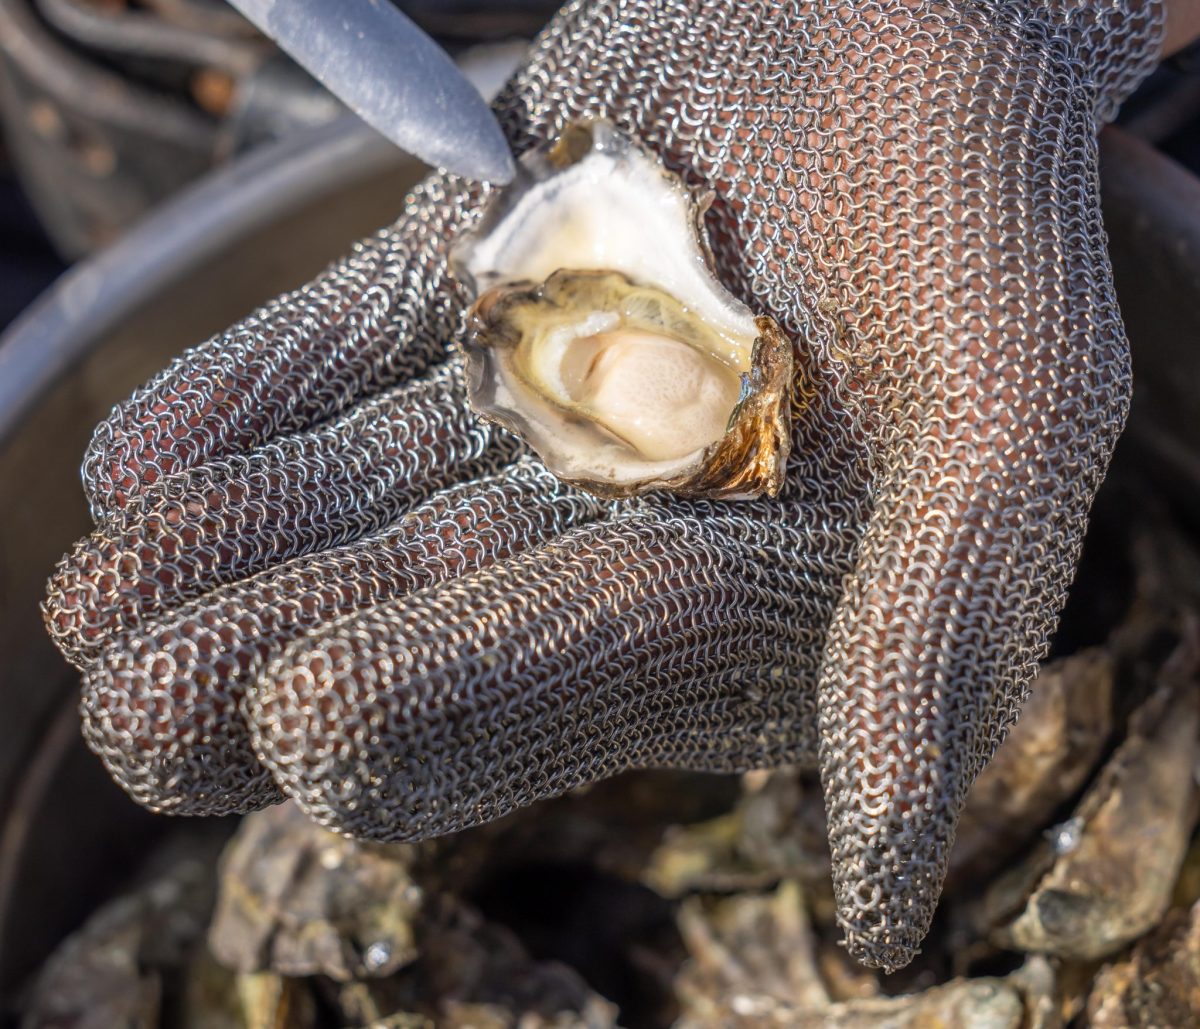 Hand wearing mesh metal glove holding shucked oyster